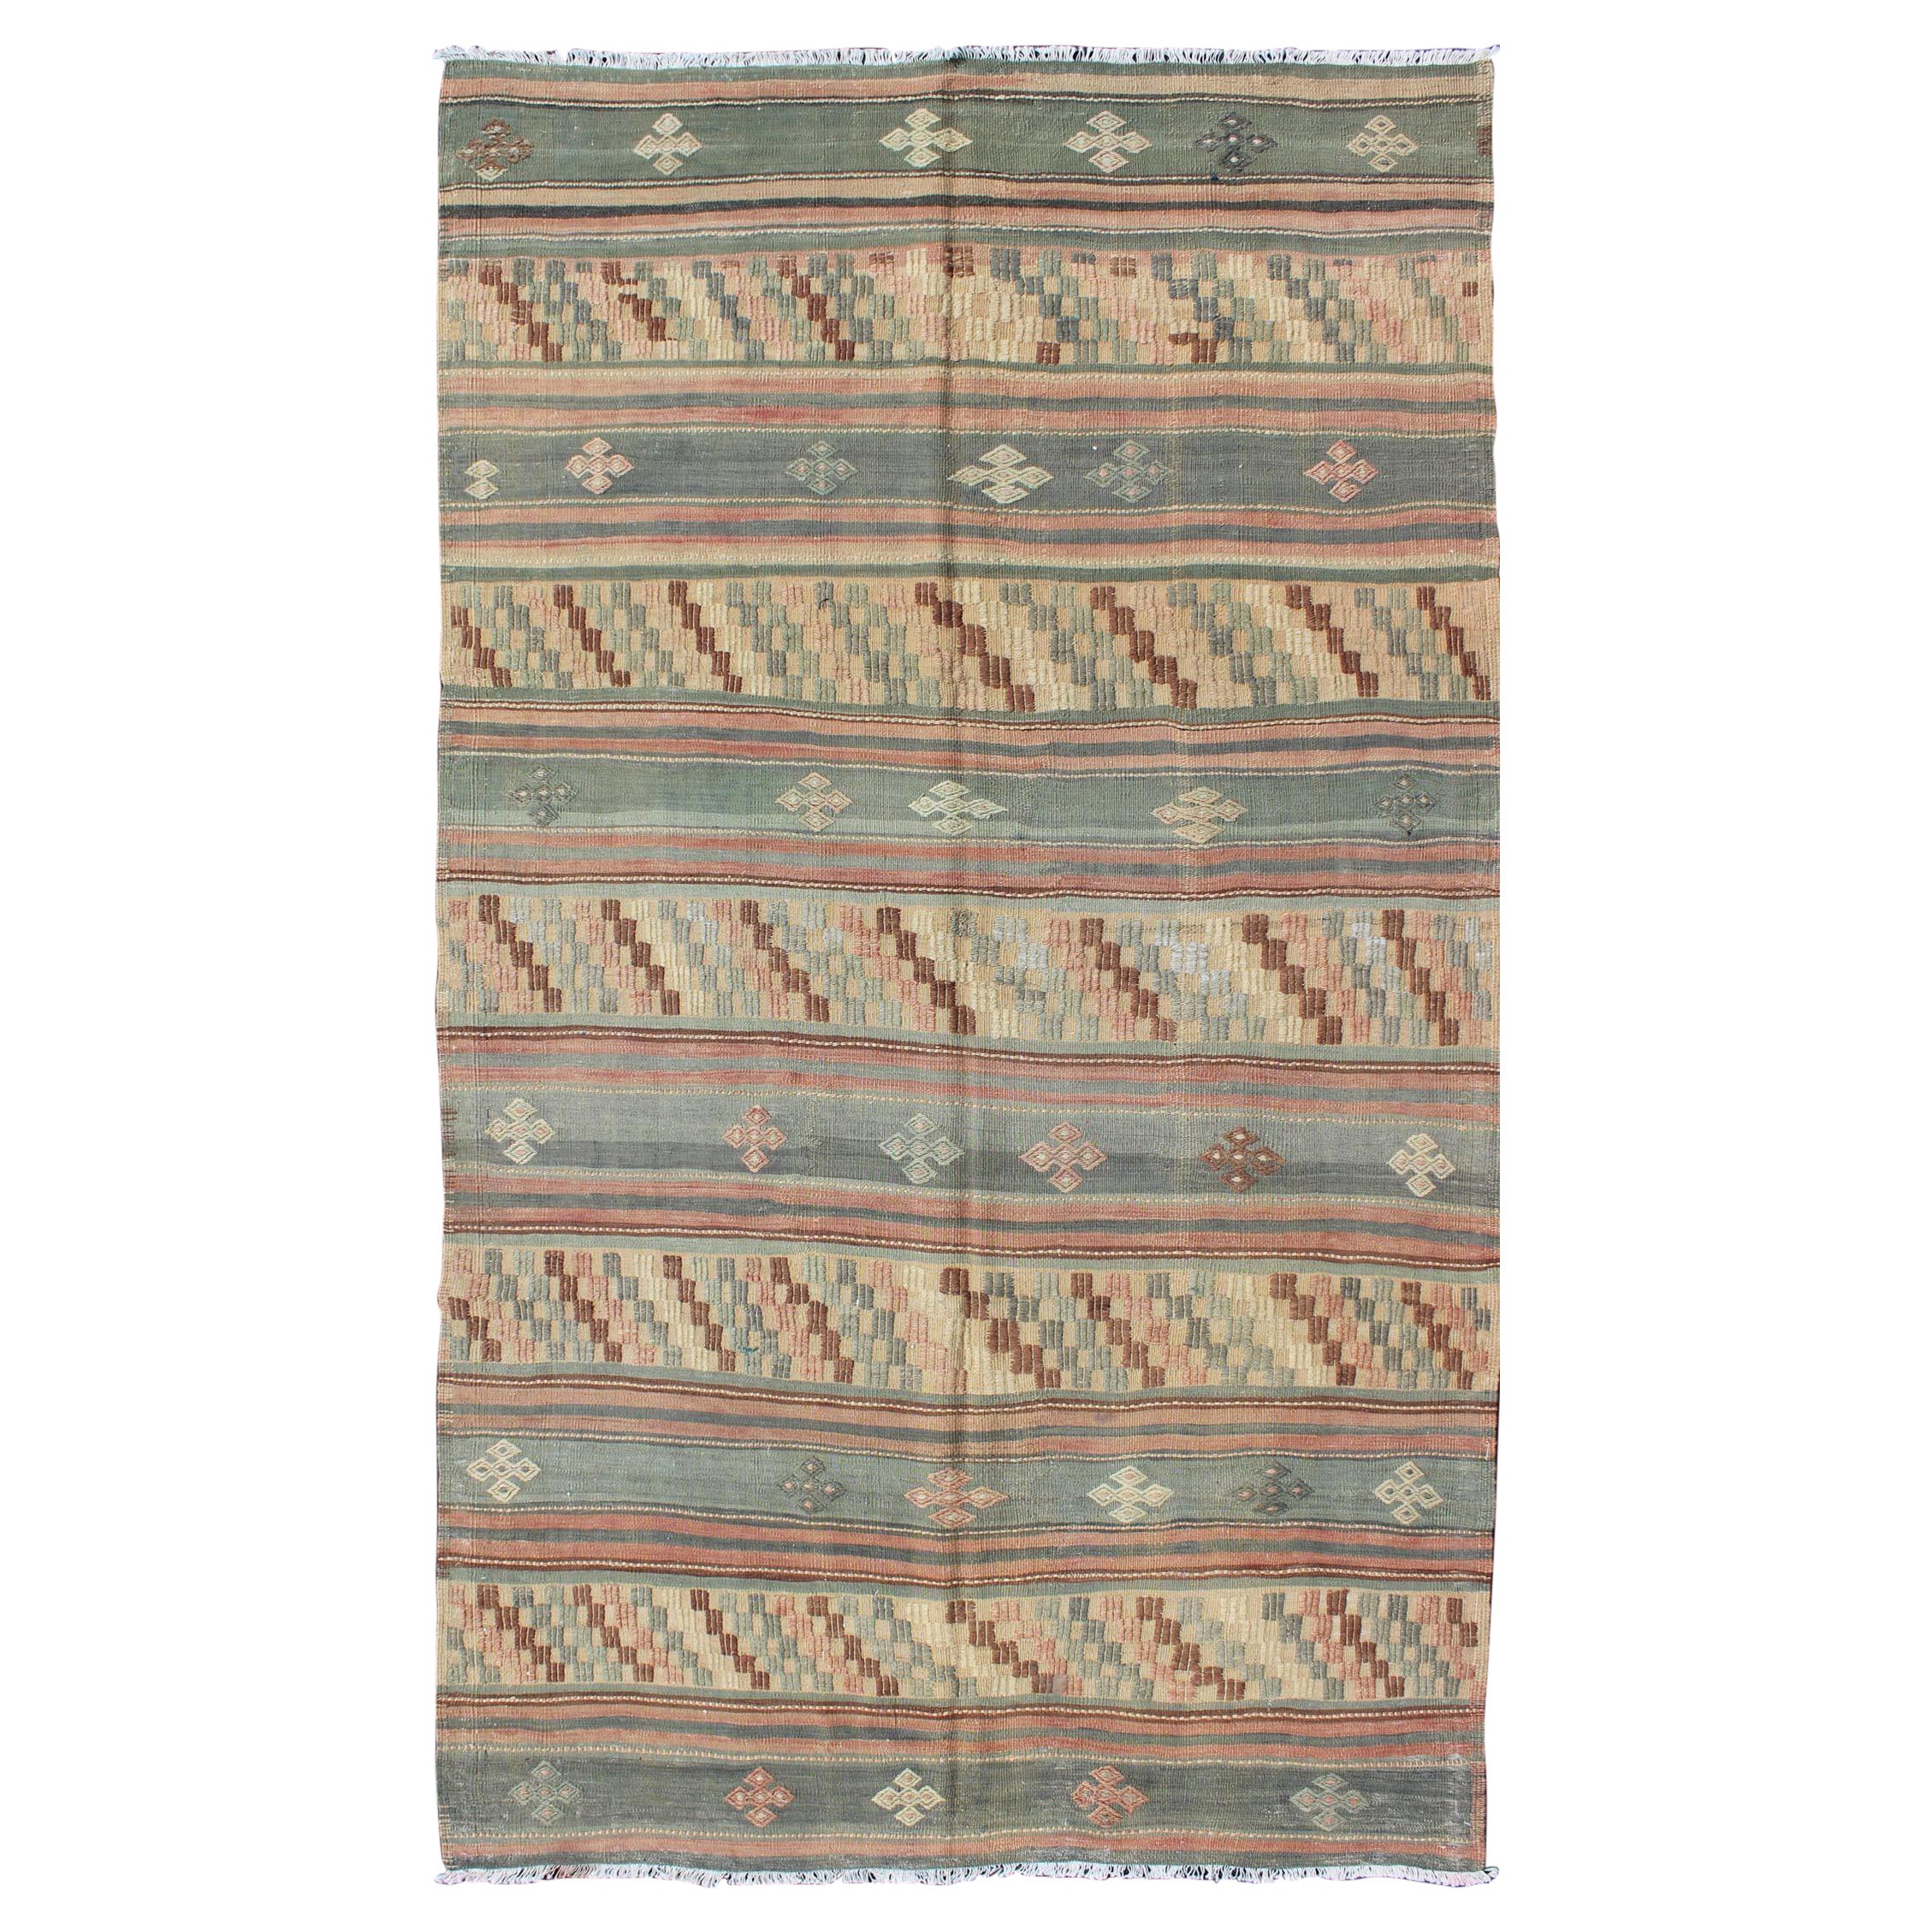 Vintage Turkish Tribal Kilim with Striped Design in Earthy Tones